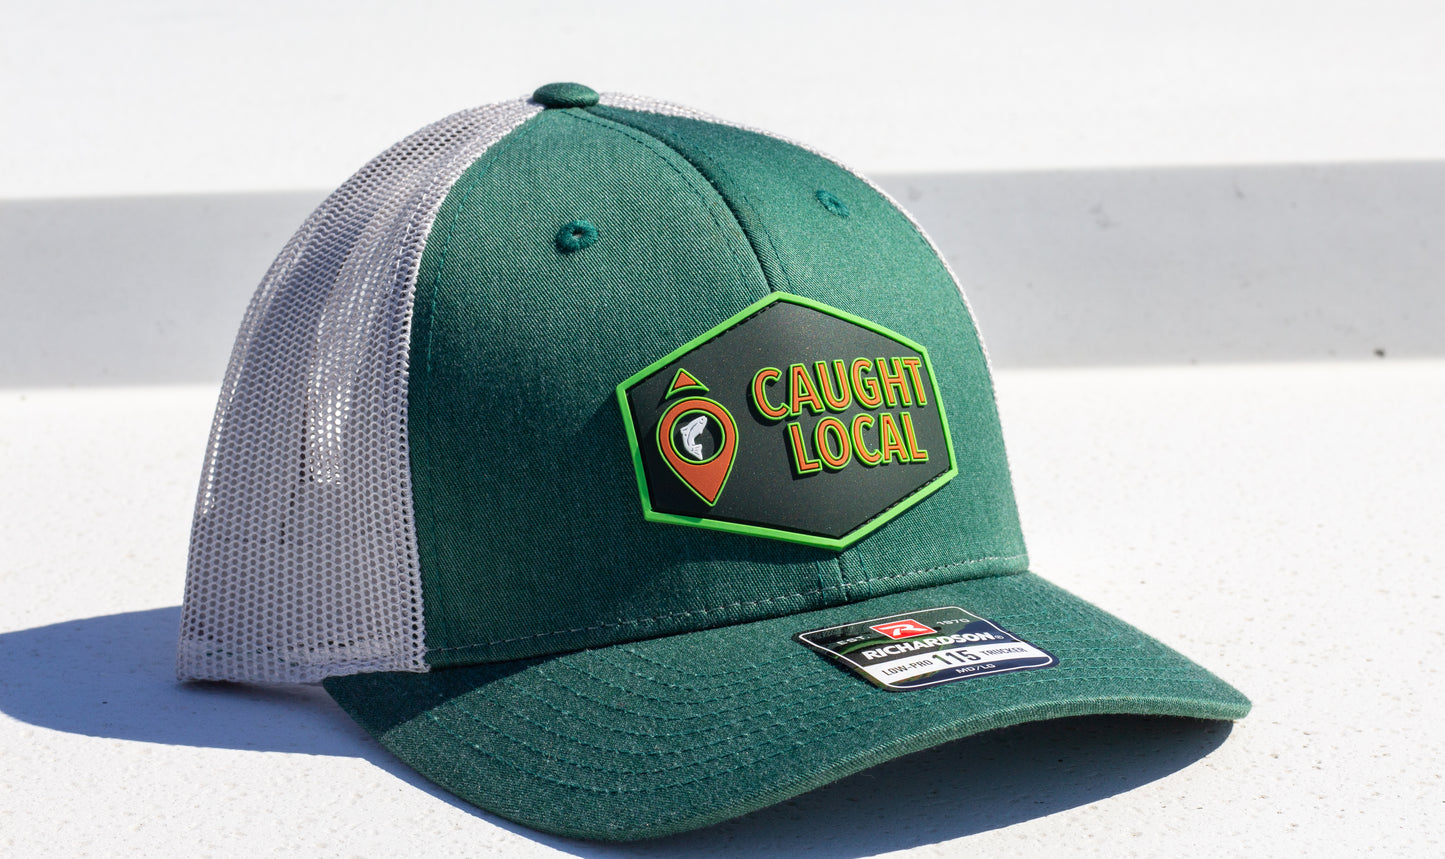 Caught Local PVC Patch Hats